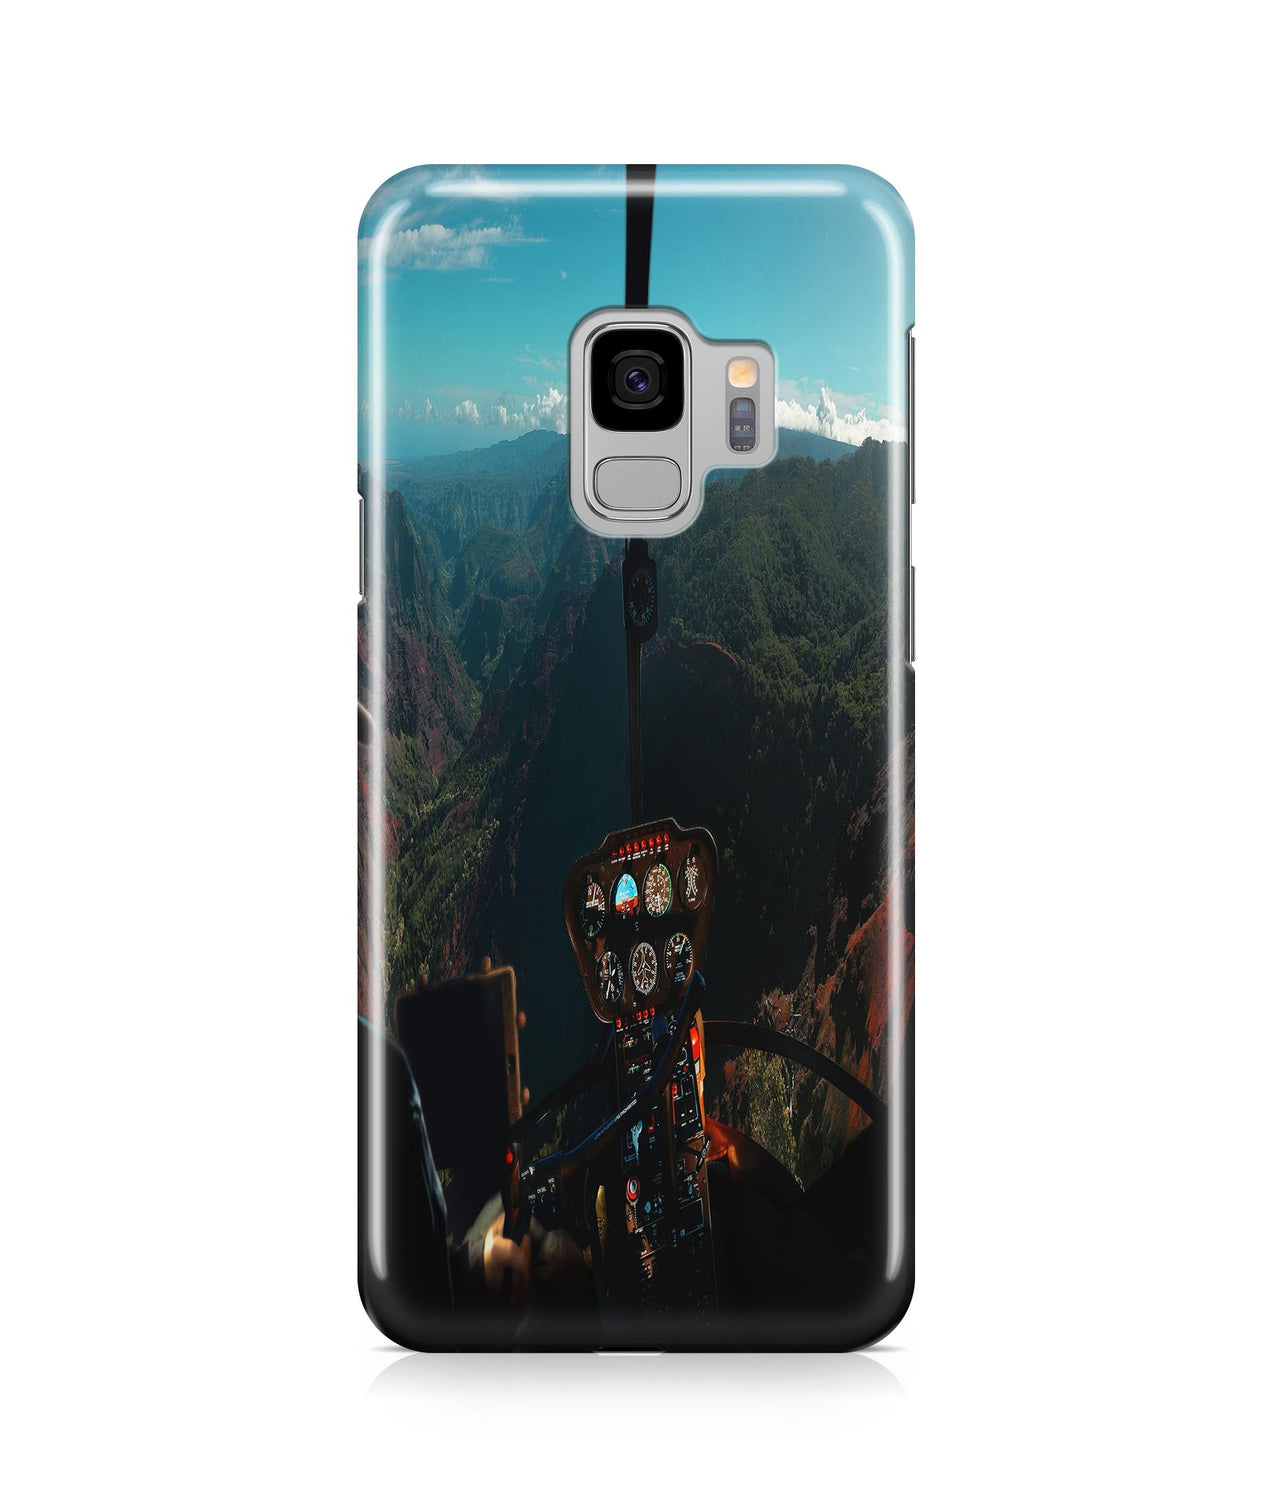 Beautiful Scenary Through Helicopter Cockpit Printed Samsung J Cases